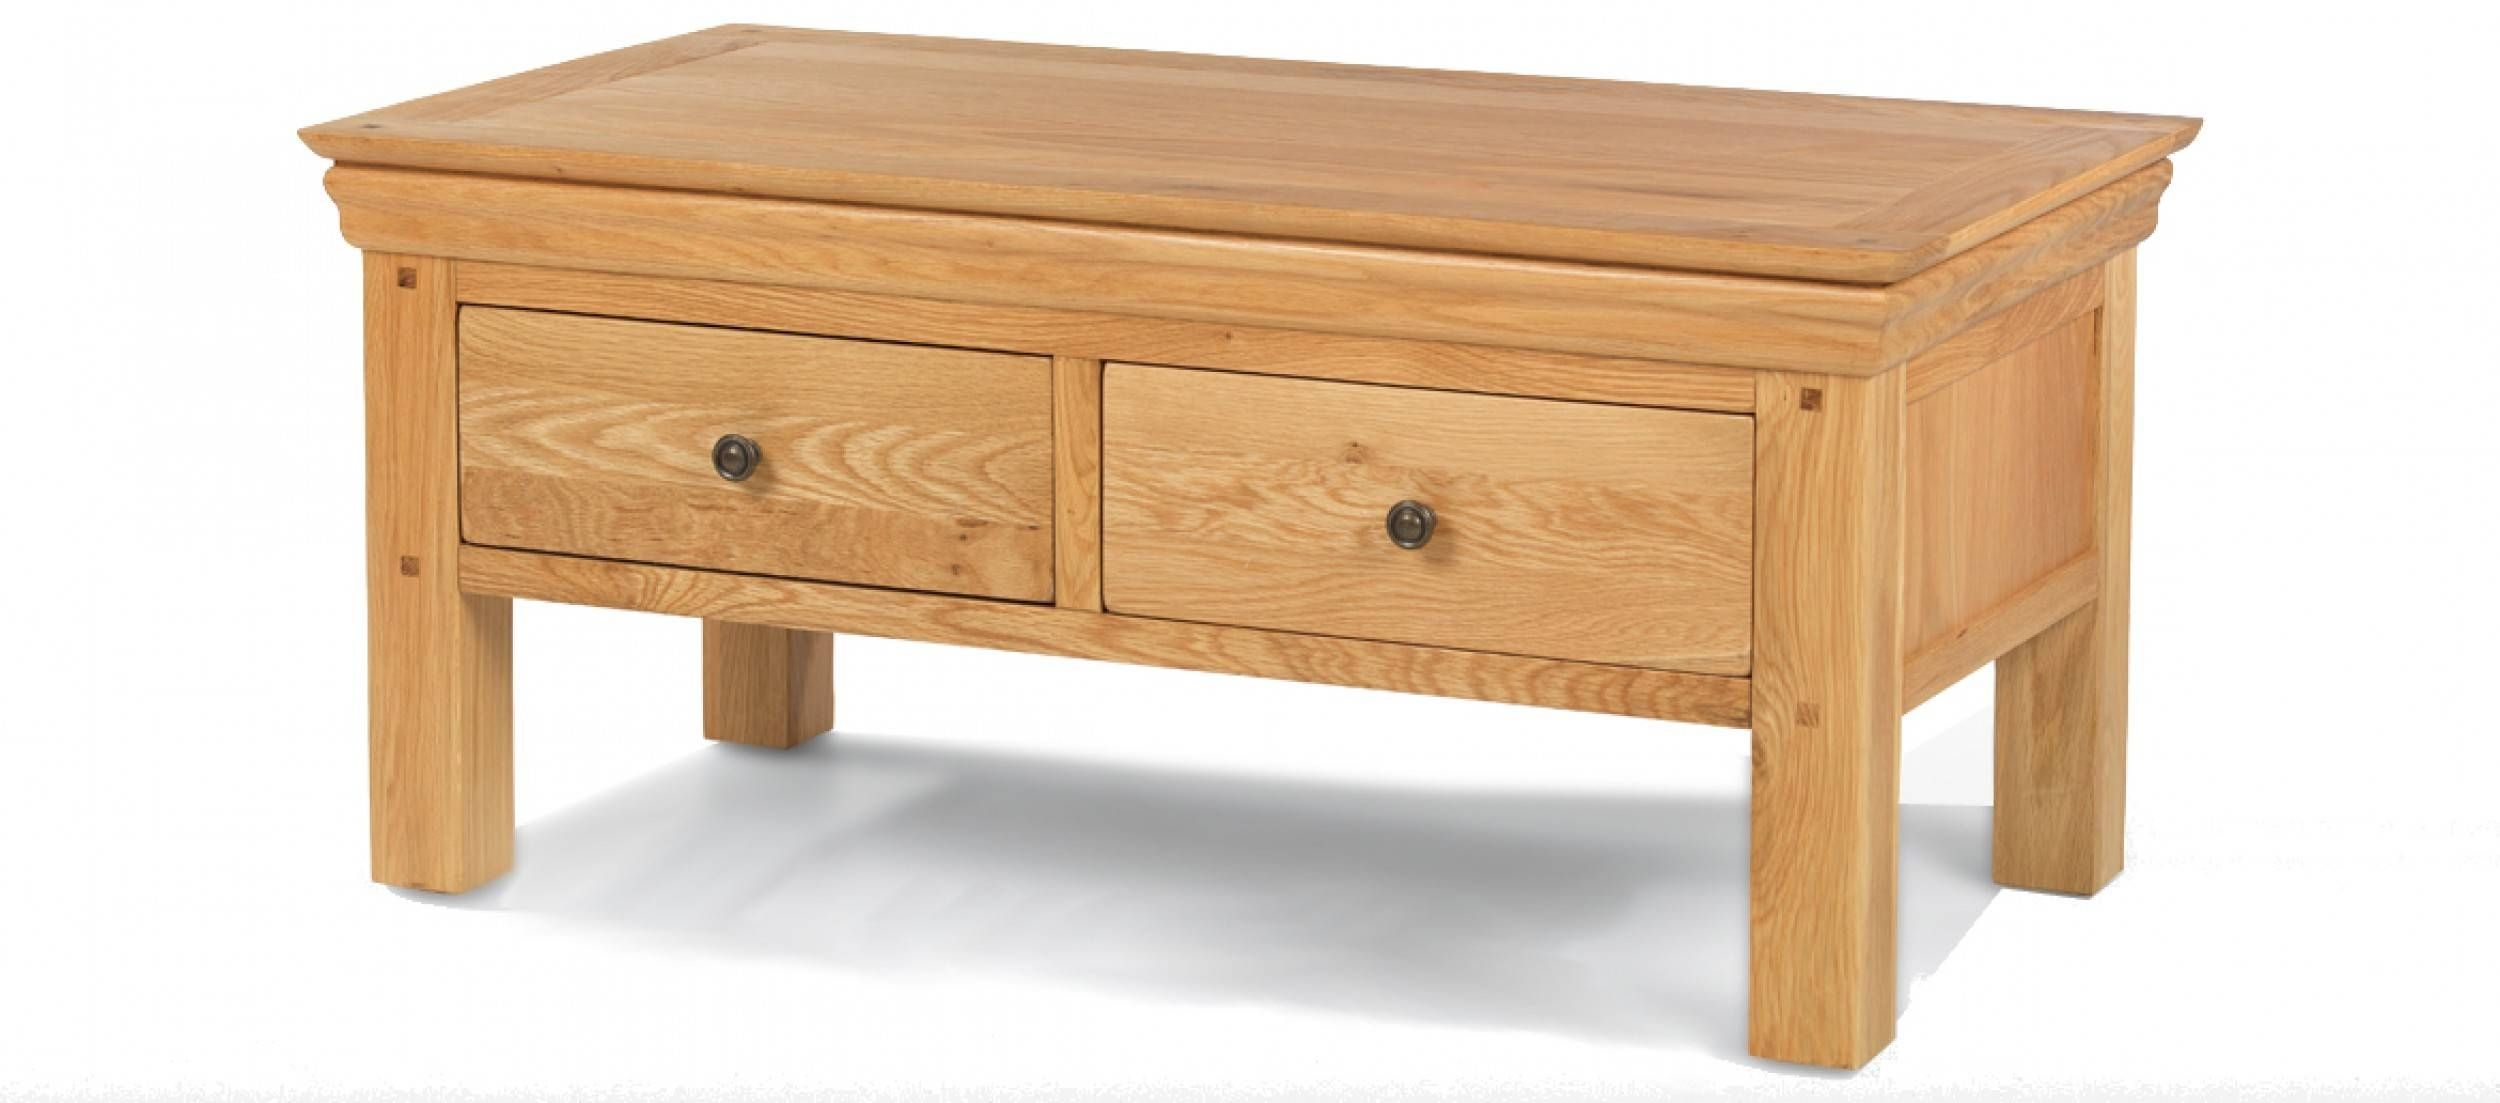 Constance Oak 2 Drawer Coffee Table | Quercus Living Inside Small Oak Coffee Tables (View 4 of 15)